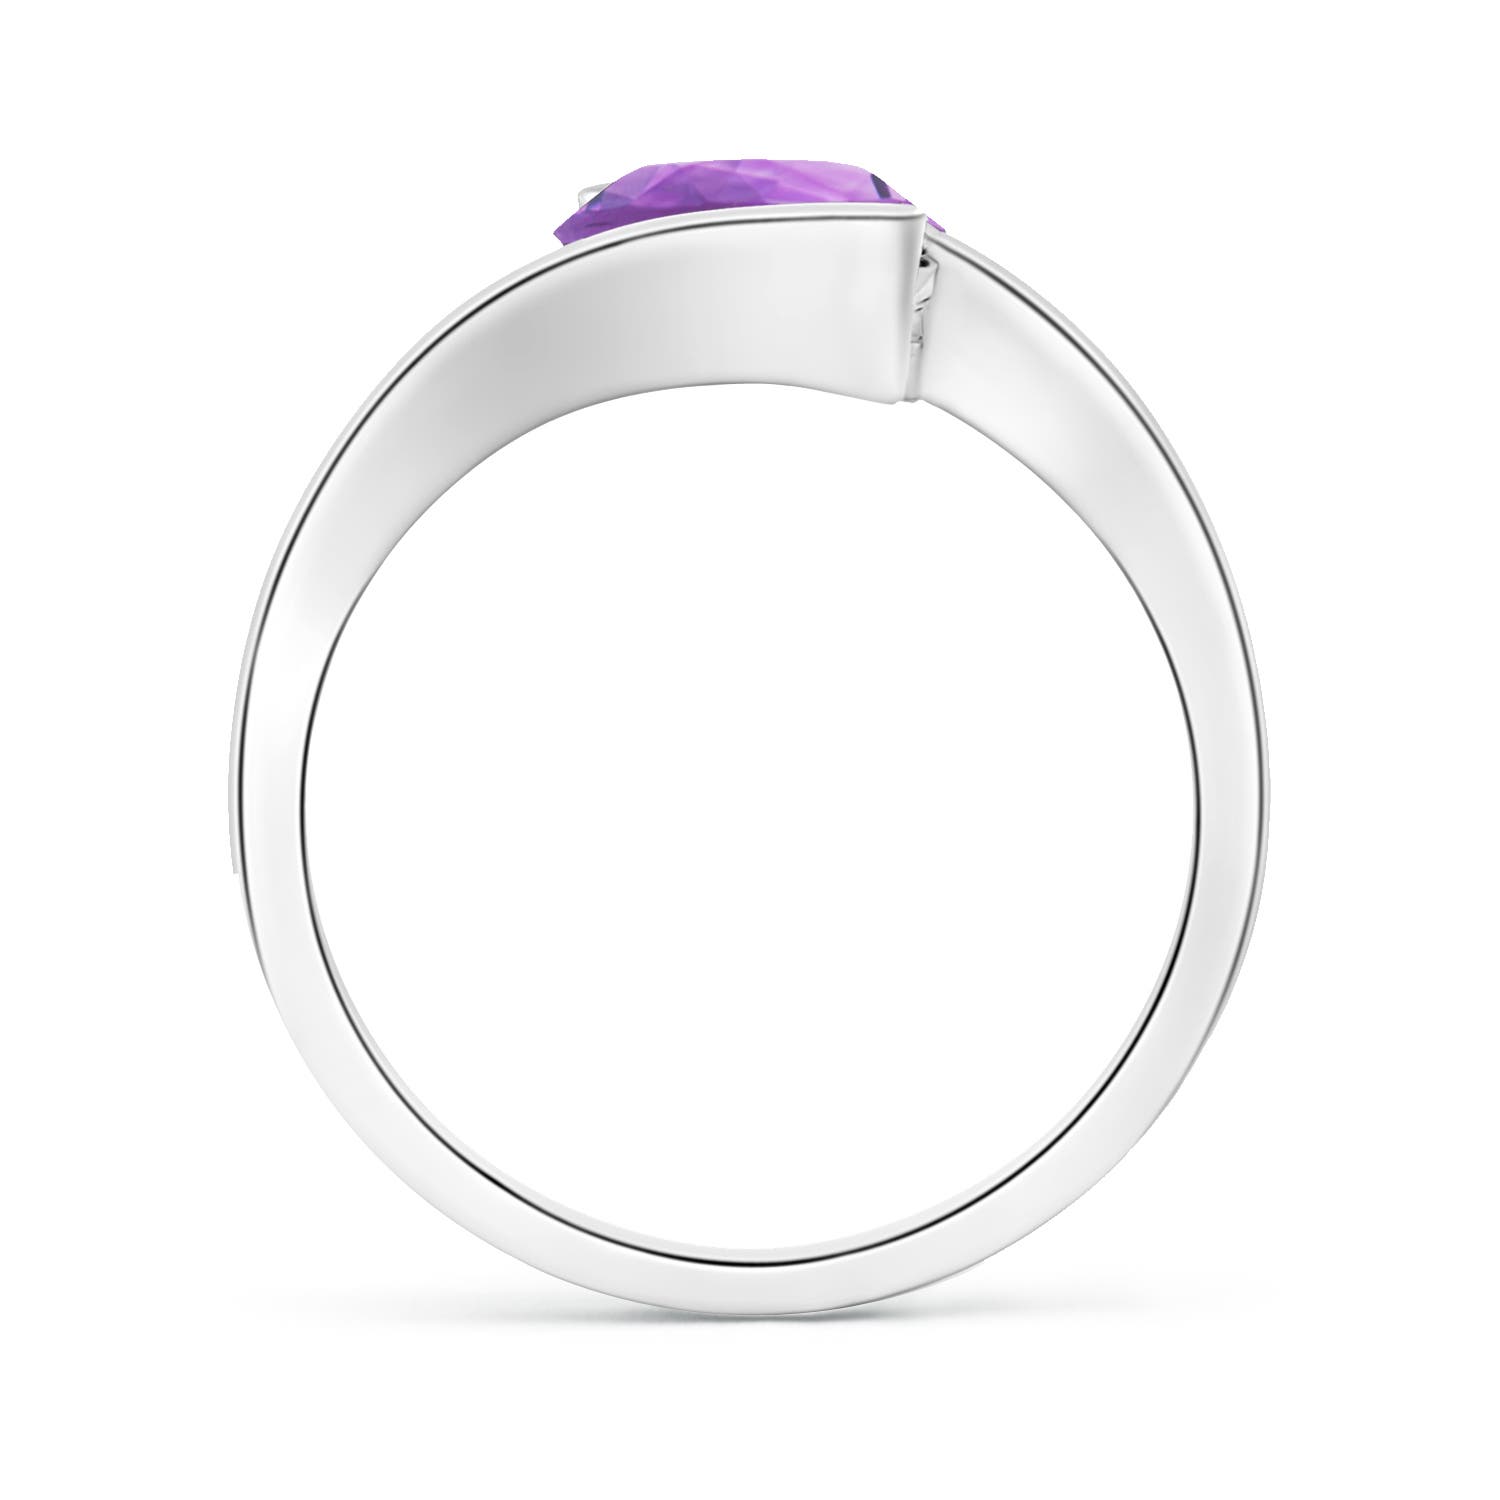 A - Amethyst / 1.7 CT / 14 KT White Gold